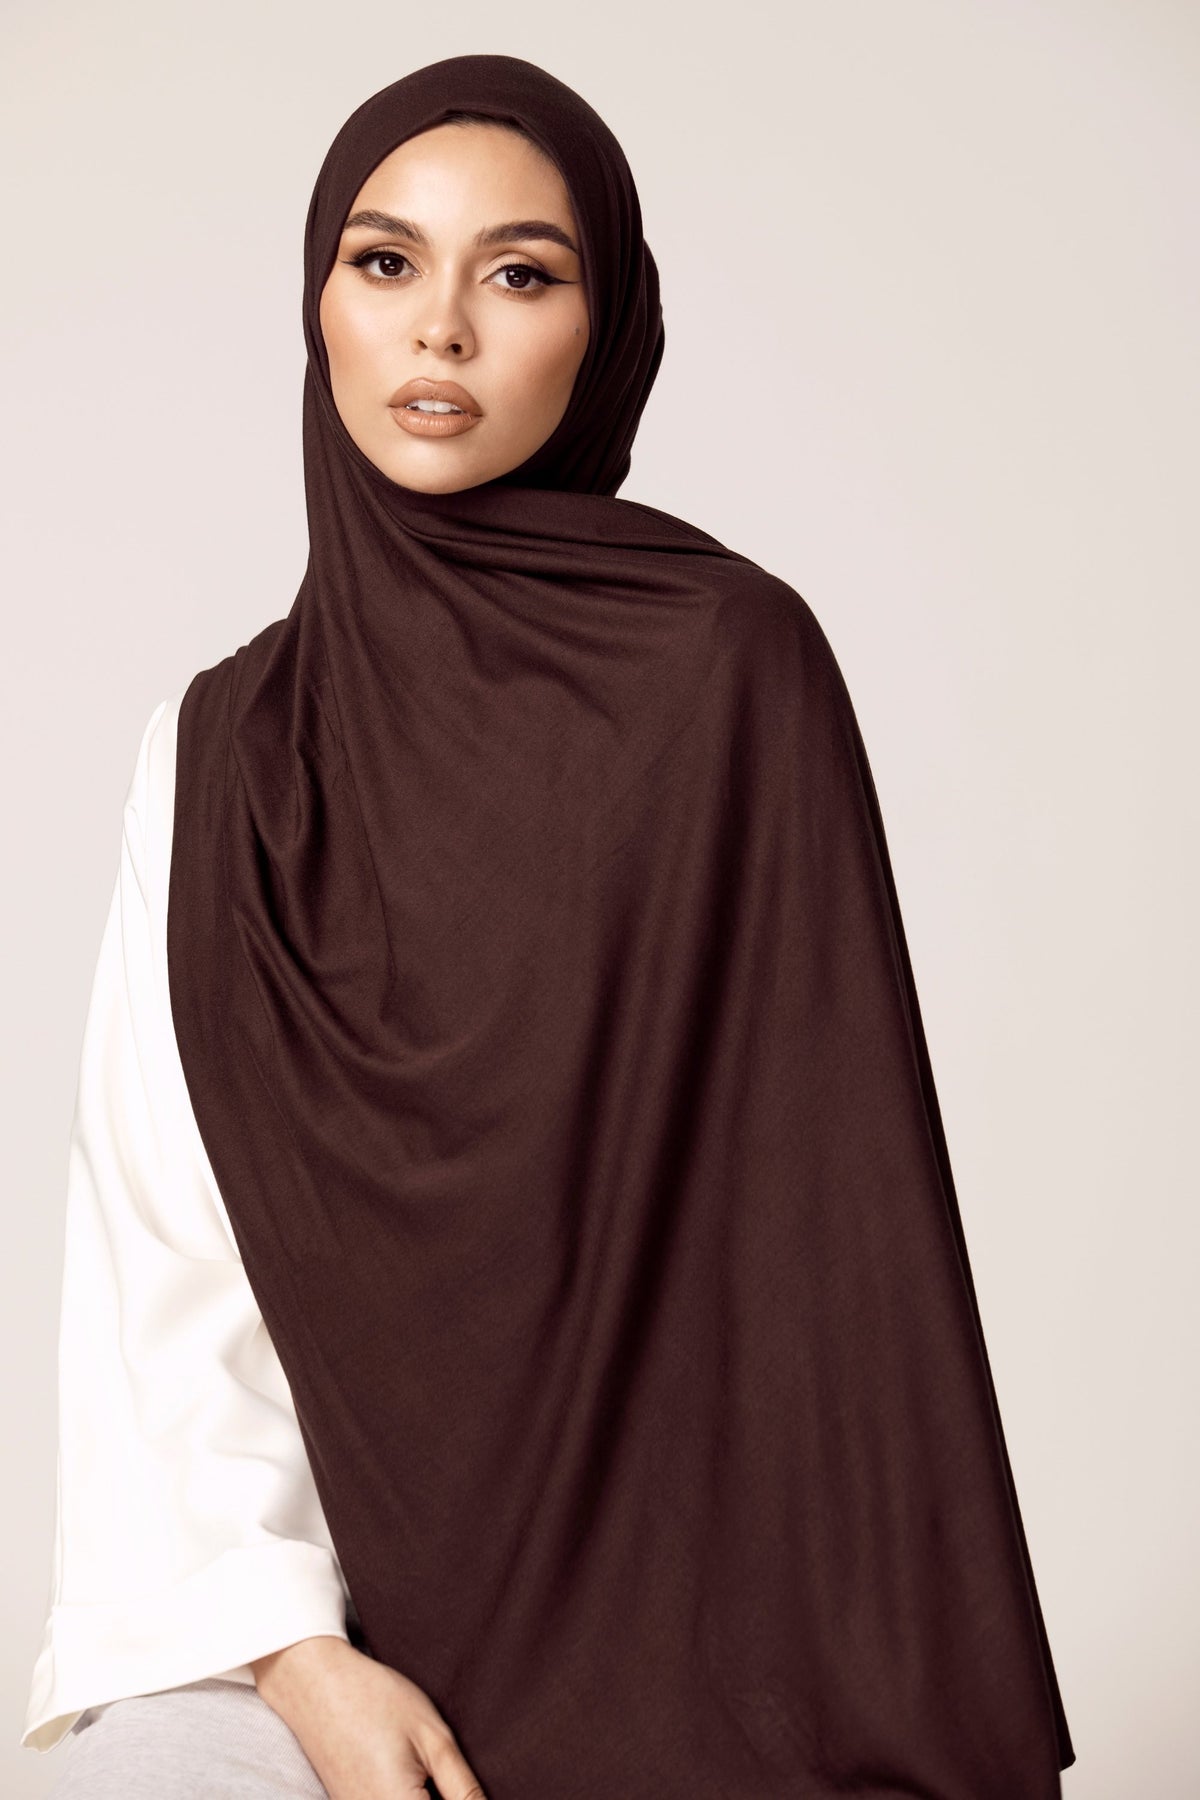 Luxury Jersey Hijab - Espresso Veiled Collection 